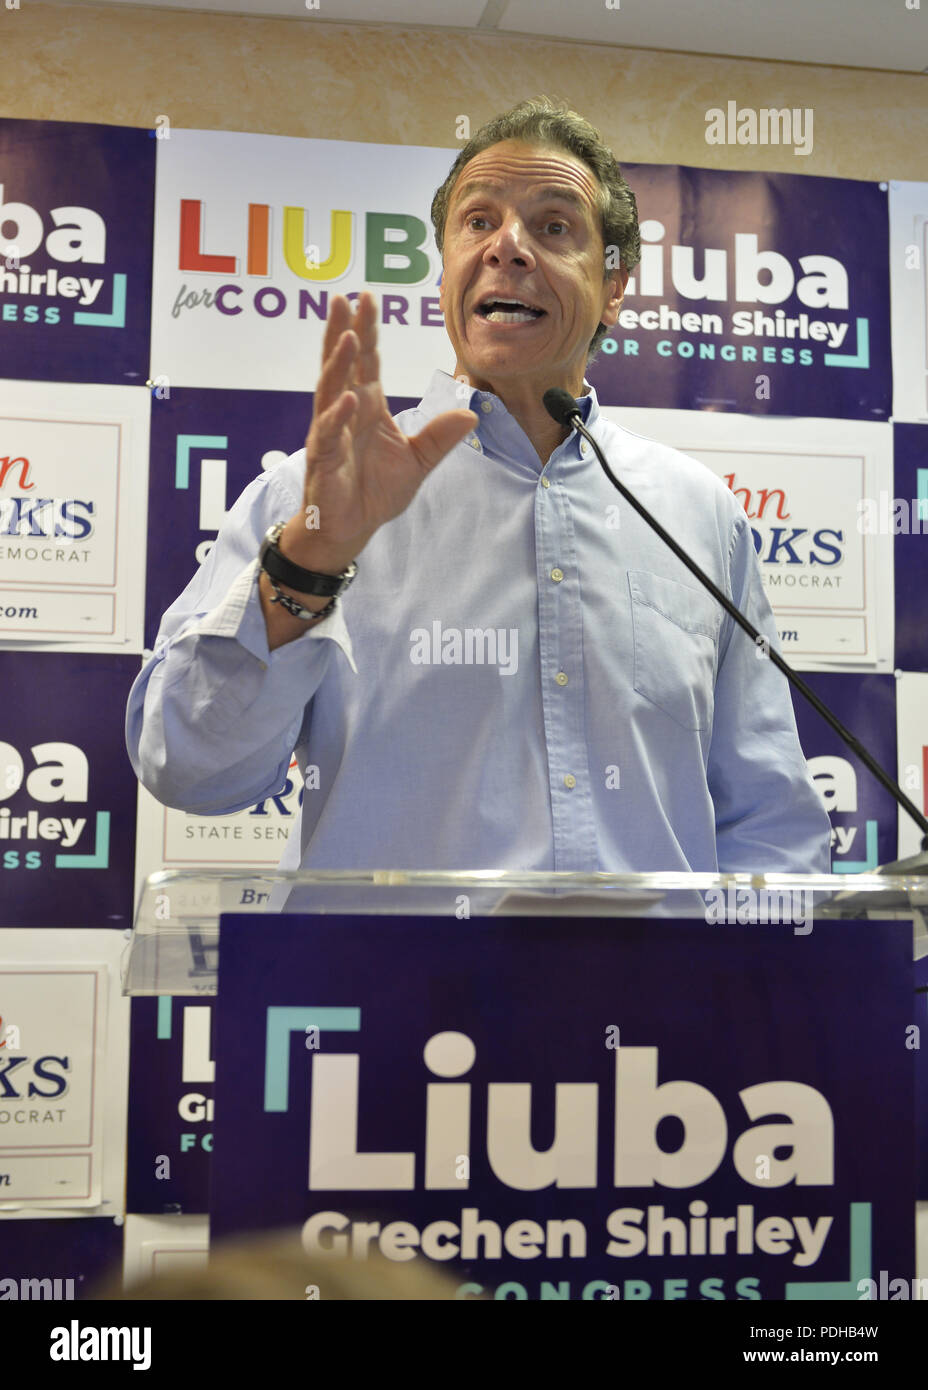 Massapequa, New York, USA. 5th Aug, 2018. L-R, Governor ANDREW CUOMO speaks at podium at opening of joint campaign office for Liuba Grechen Shirley, Congressional candidate for NY 2nd District; and NY Senator John Brooks, aiming for a Democratic Blue Wave in November midterm elections. Credit: Ann Parry/ZUMA Wire/Alamy Live News Stock Photo